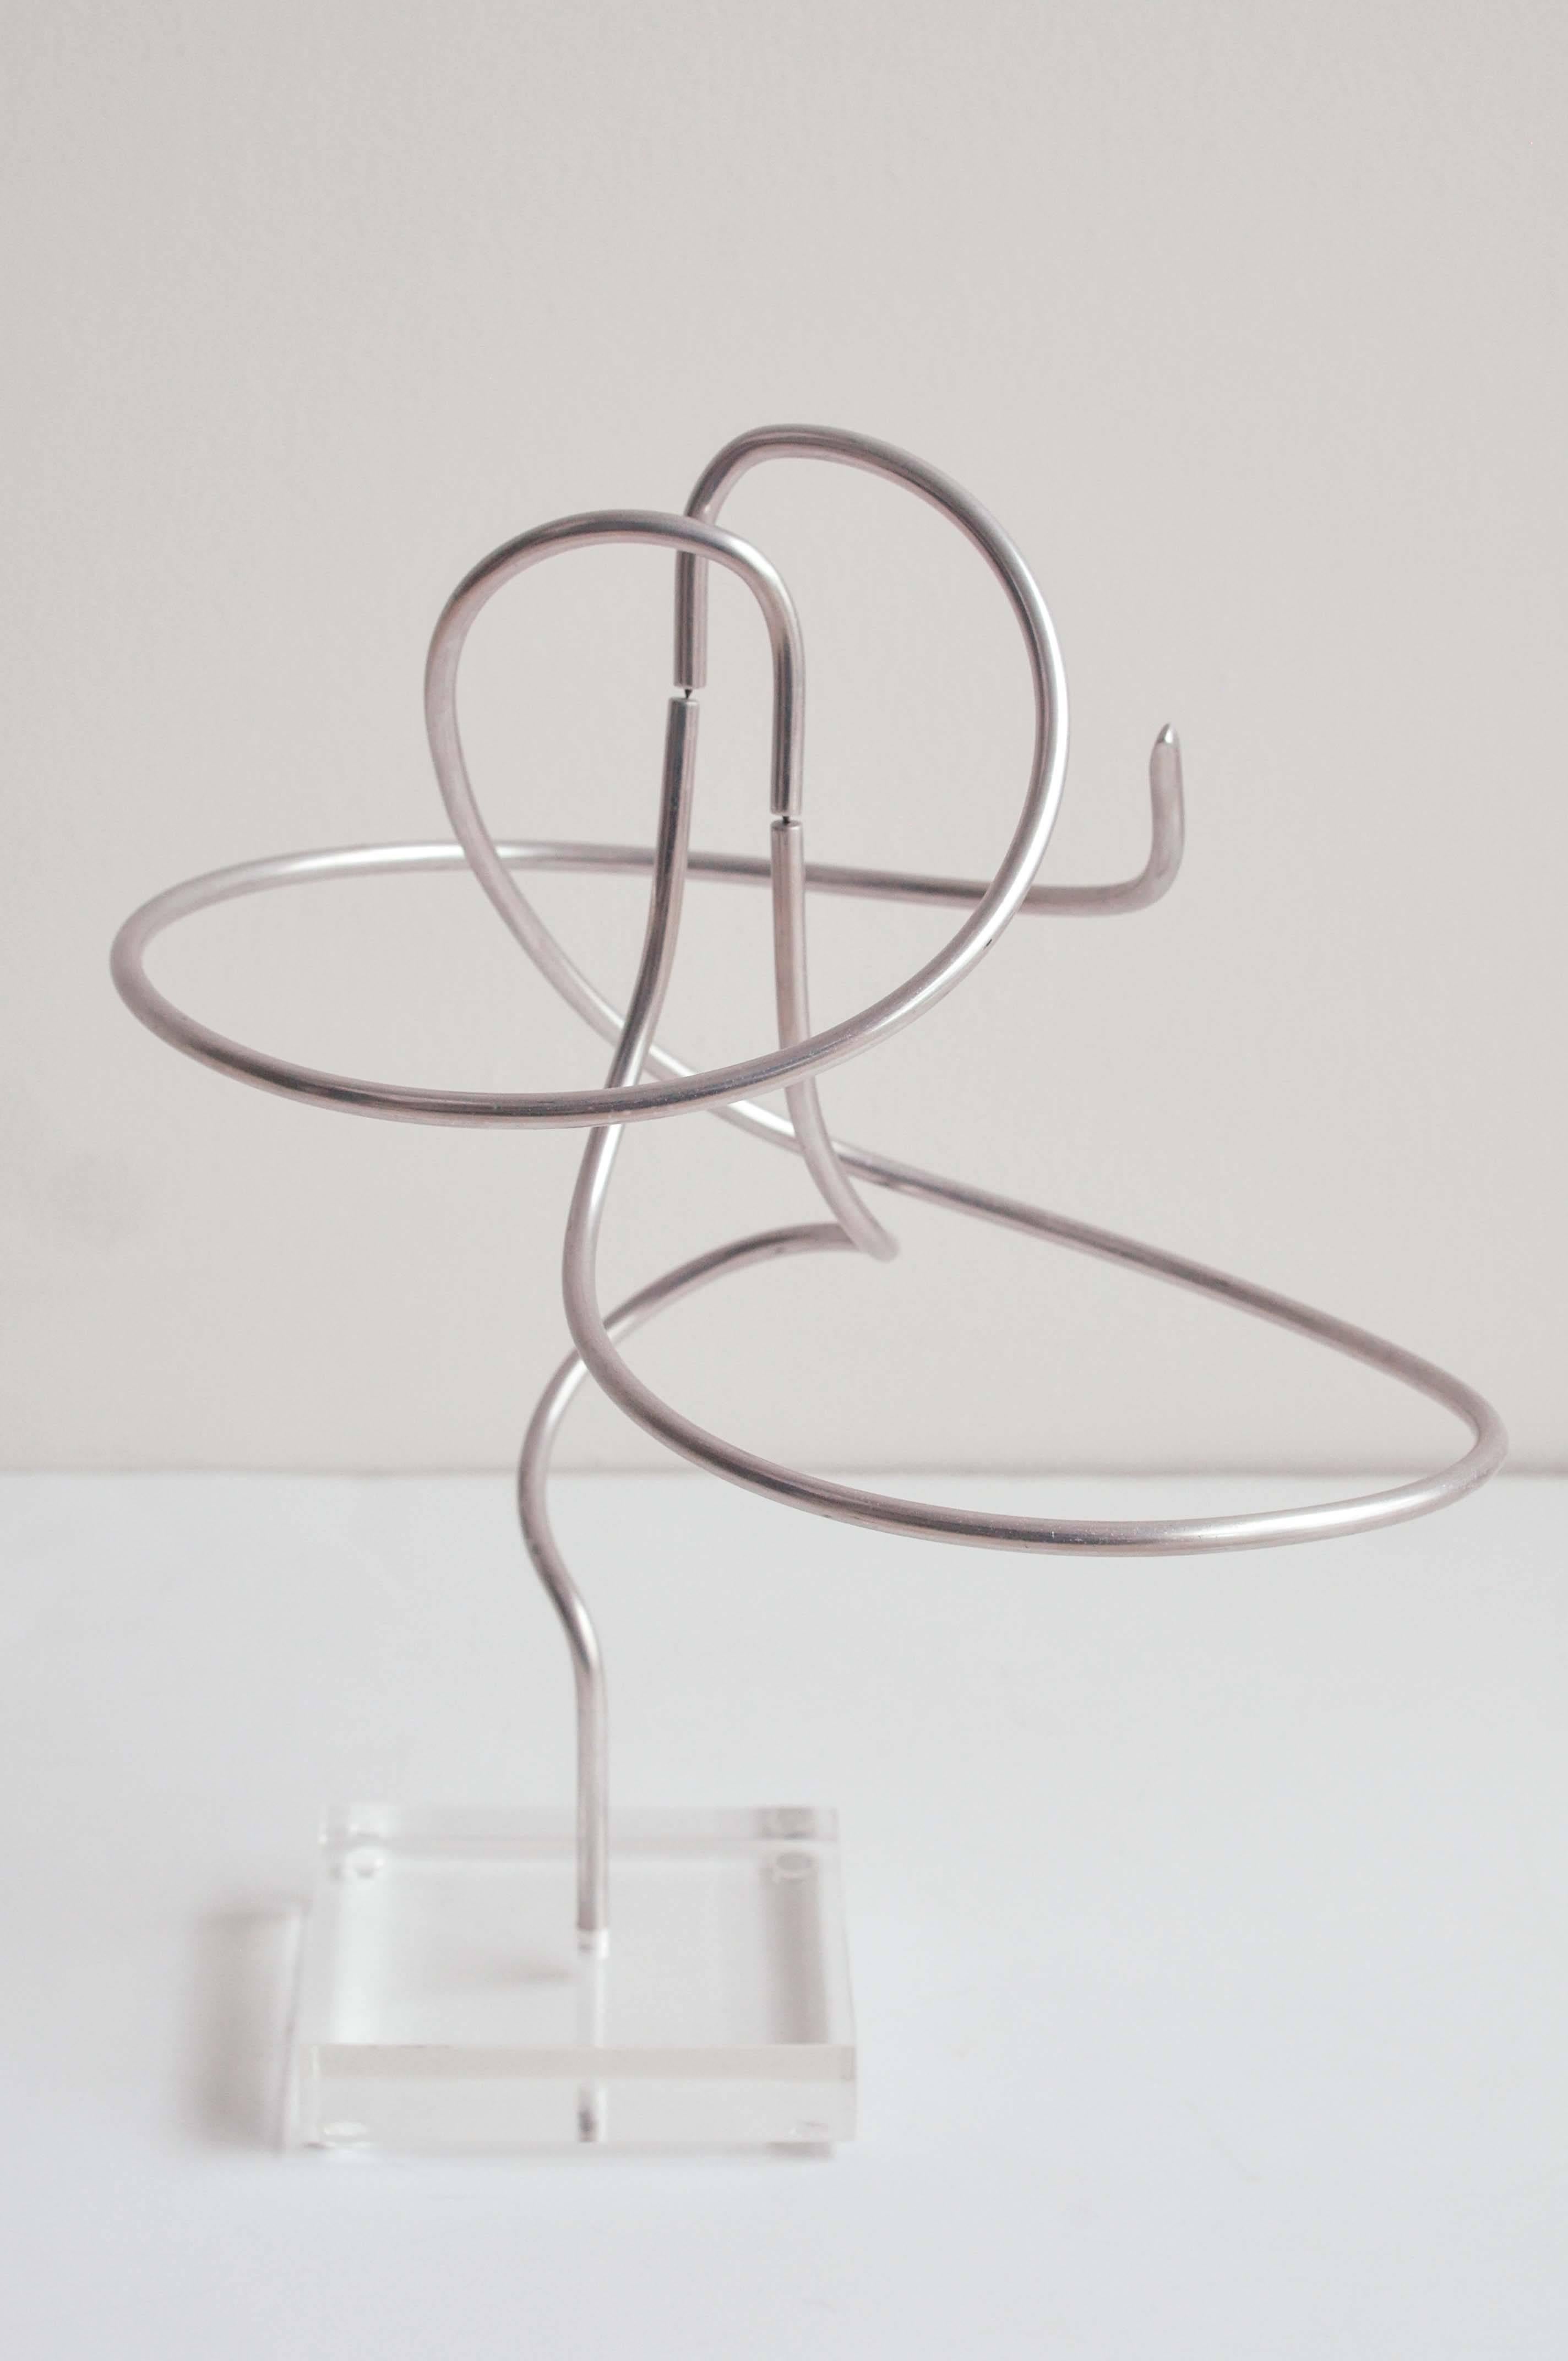 1970s Kinetic Aluminum Sculpture by Charles Taylor In Good Condition For Sale In Winnetka, IL